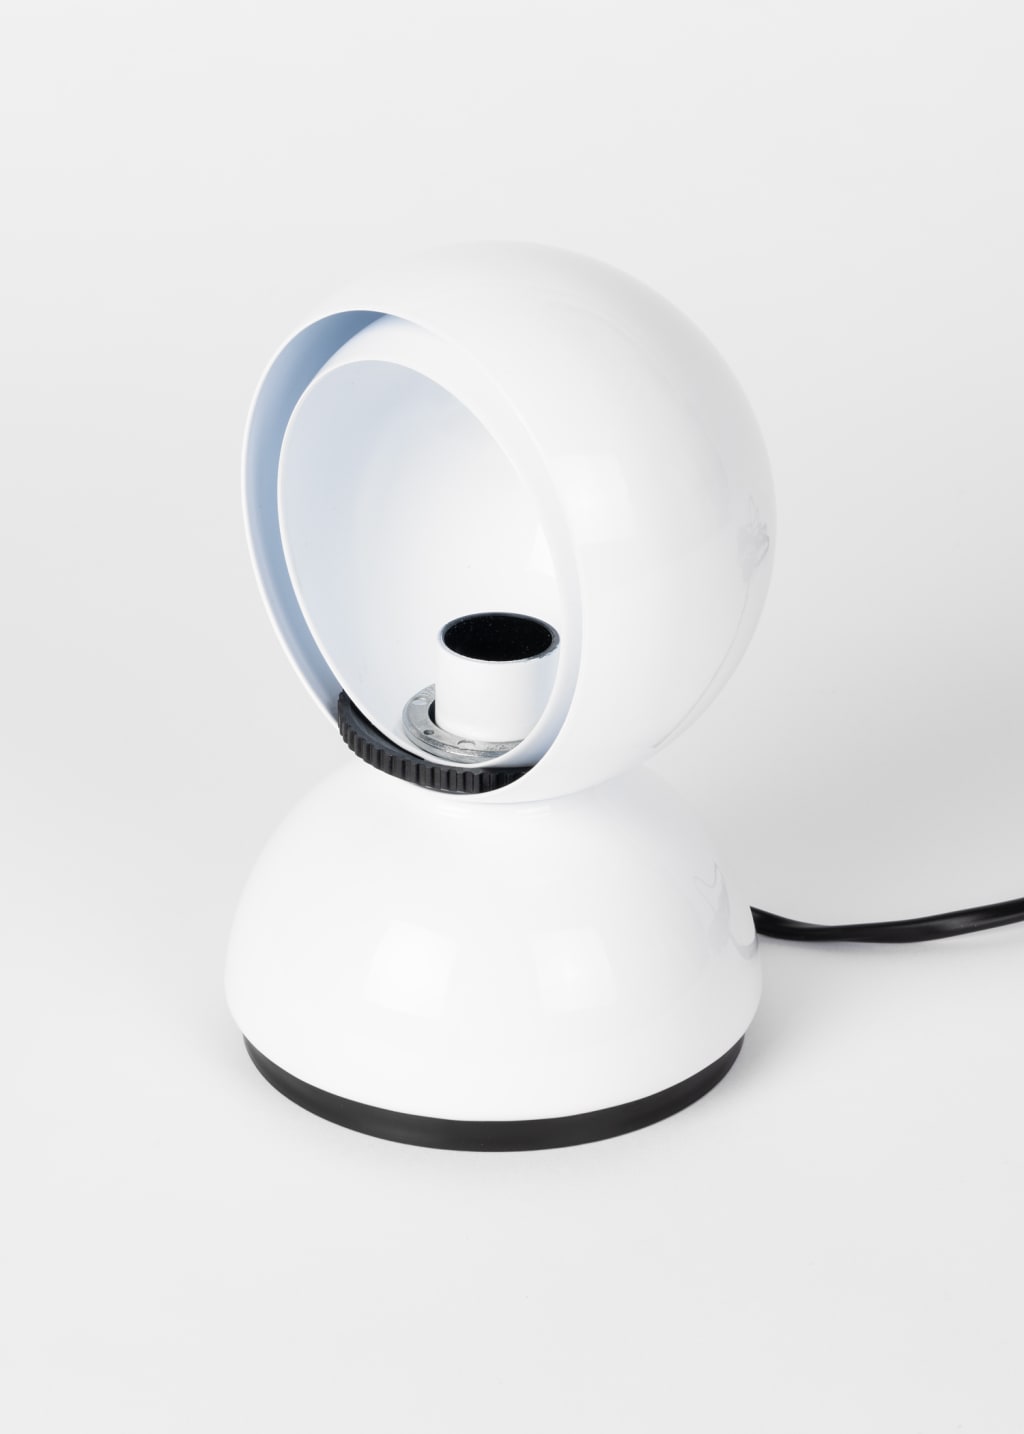 Product View - White 'Eclisse' Table Lamp by Artemide - EU Plug